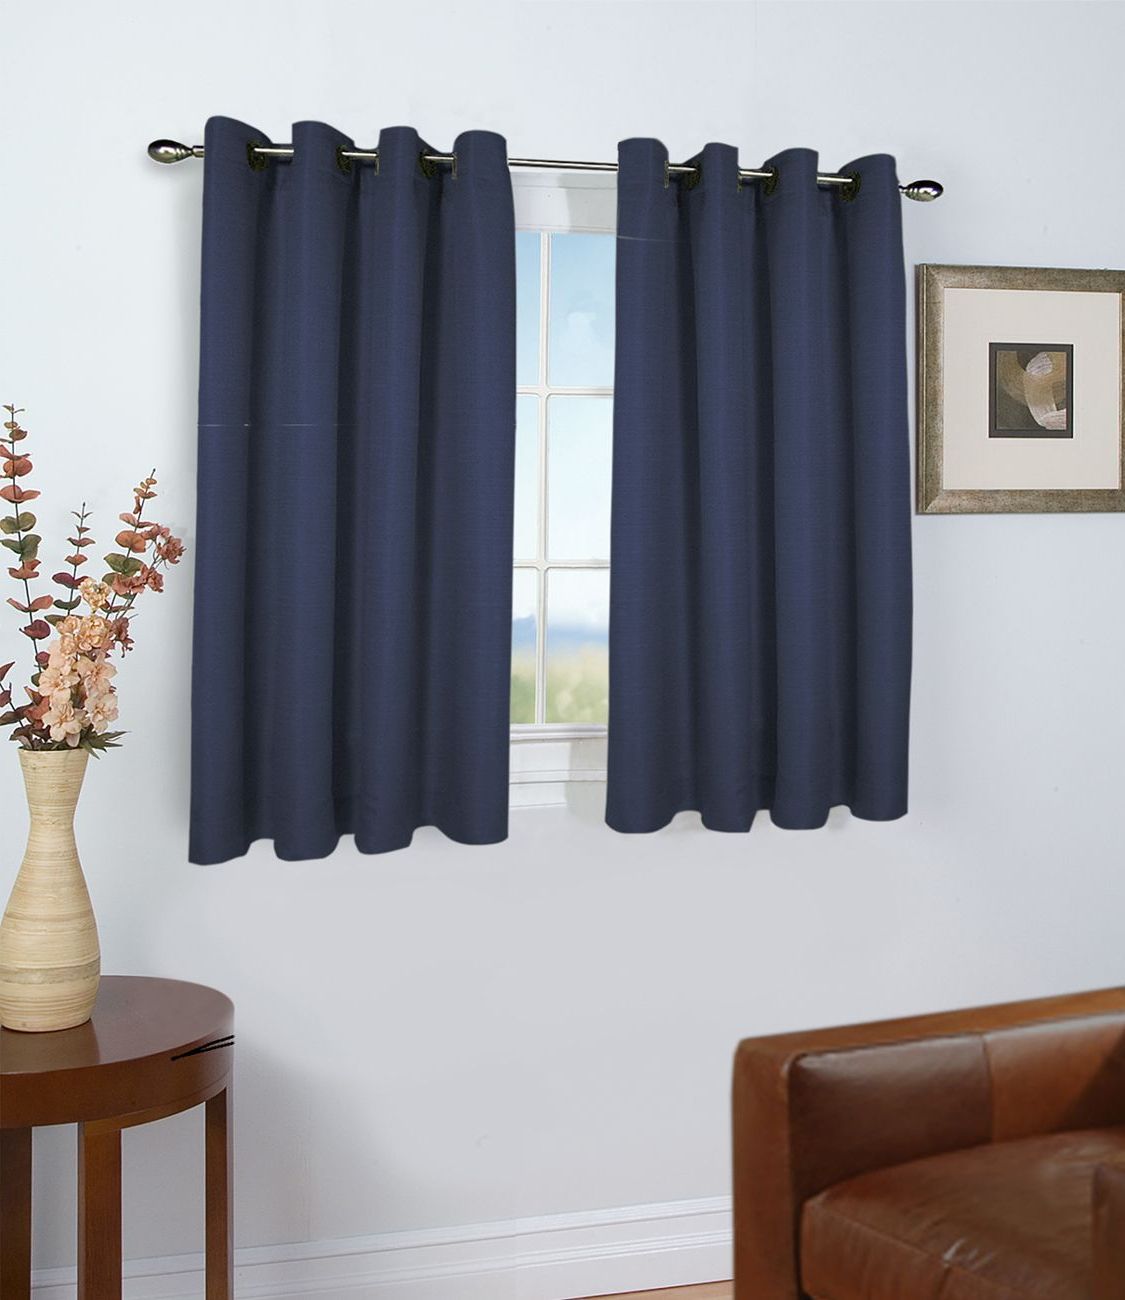 45 Inch Long Curtains – Thecurtainshop Throughout Fashionable Ultimate Blackout Short Length Grommet Curtain Panels (View 11 of 20)